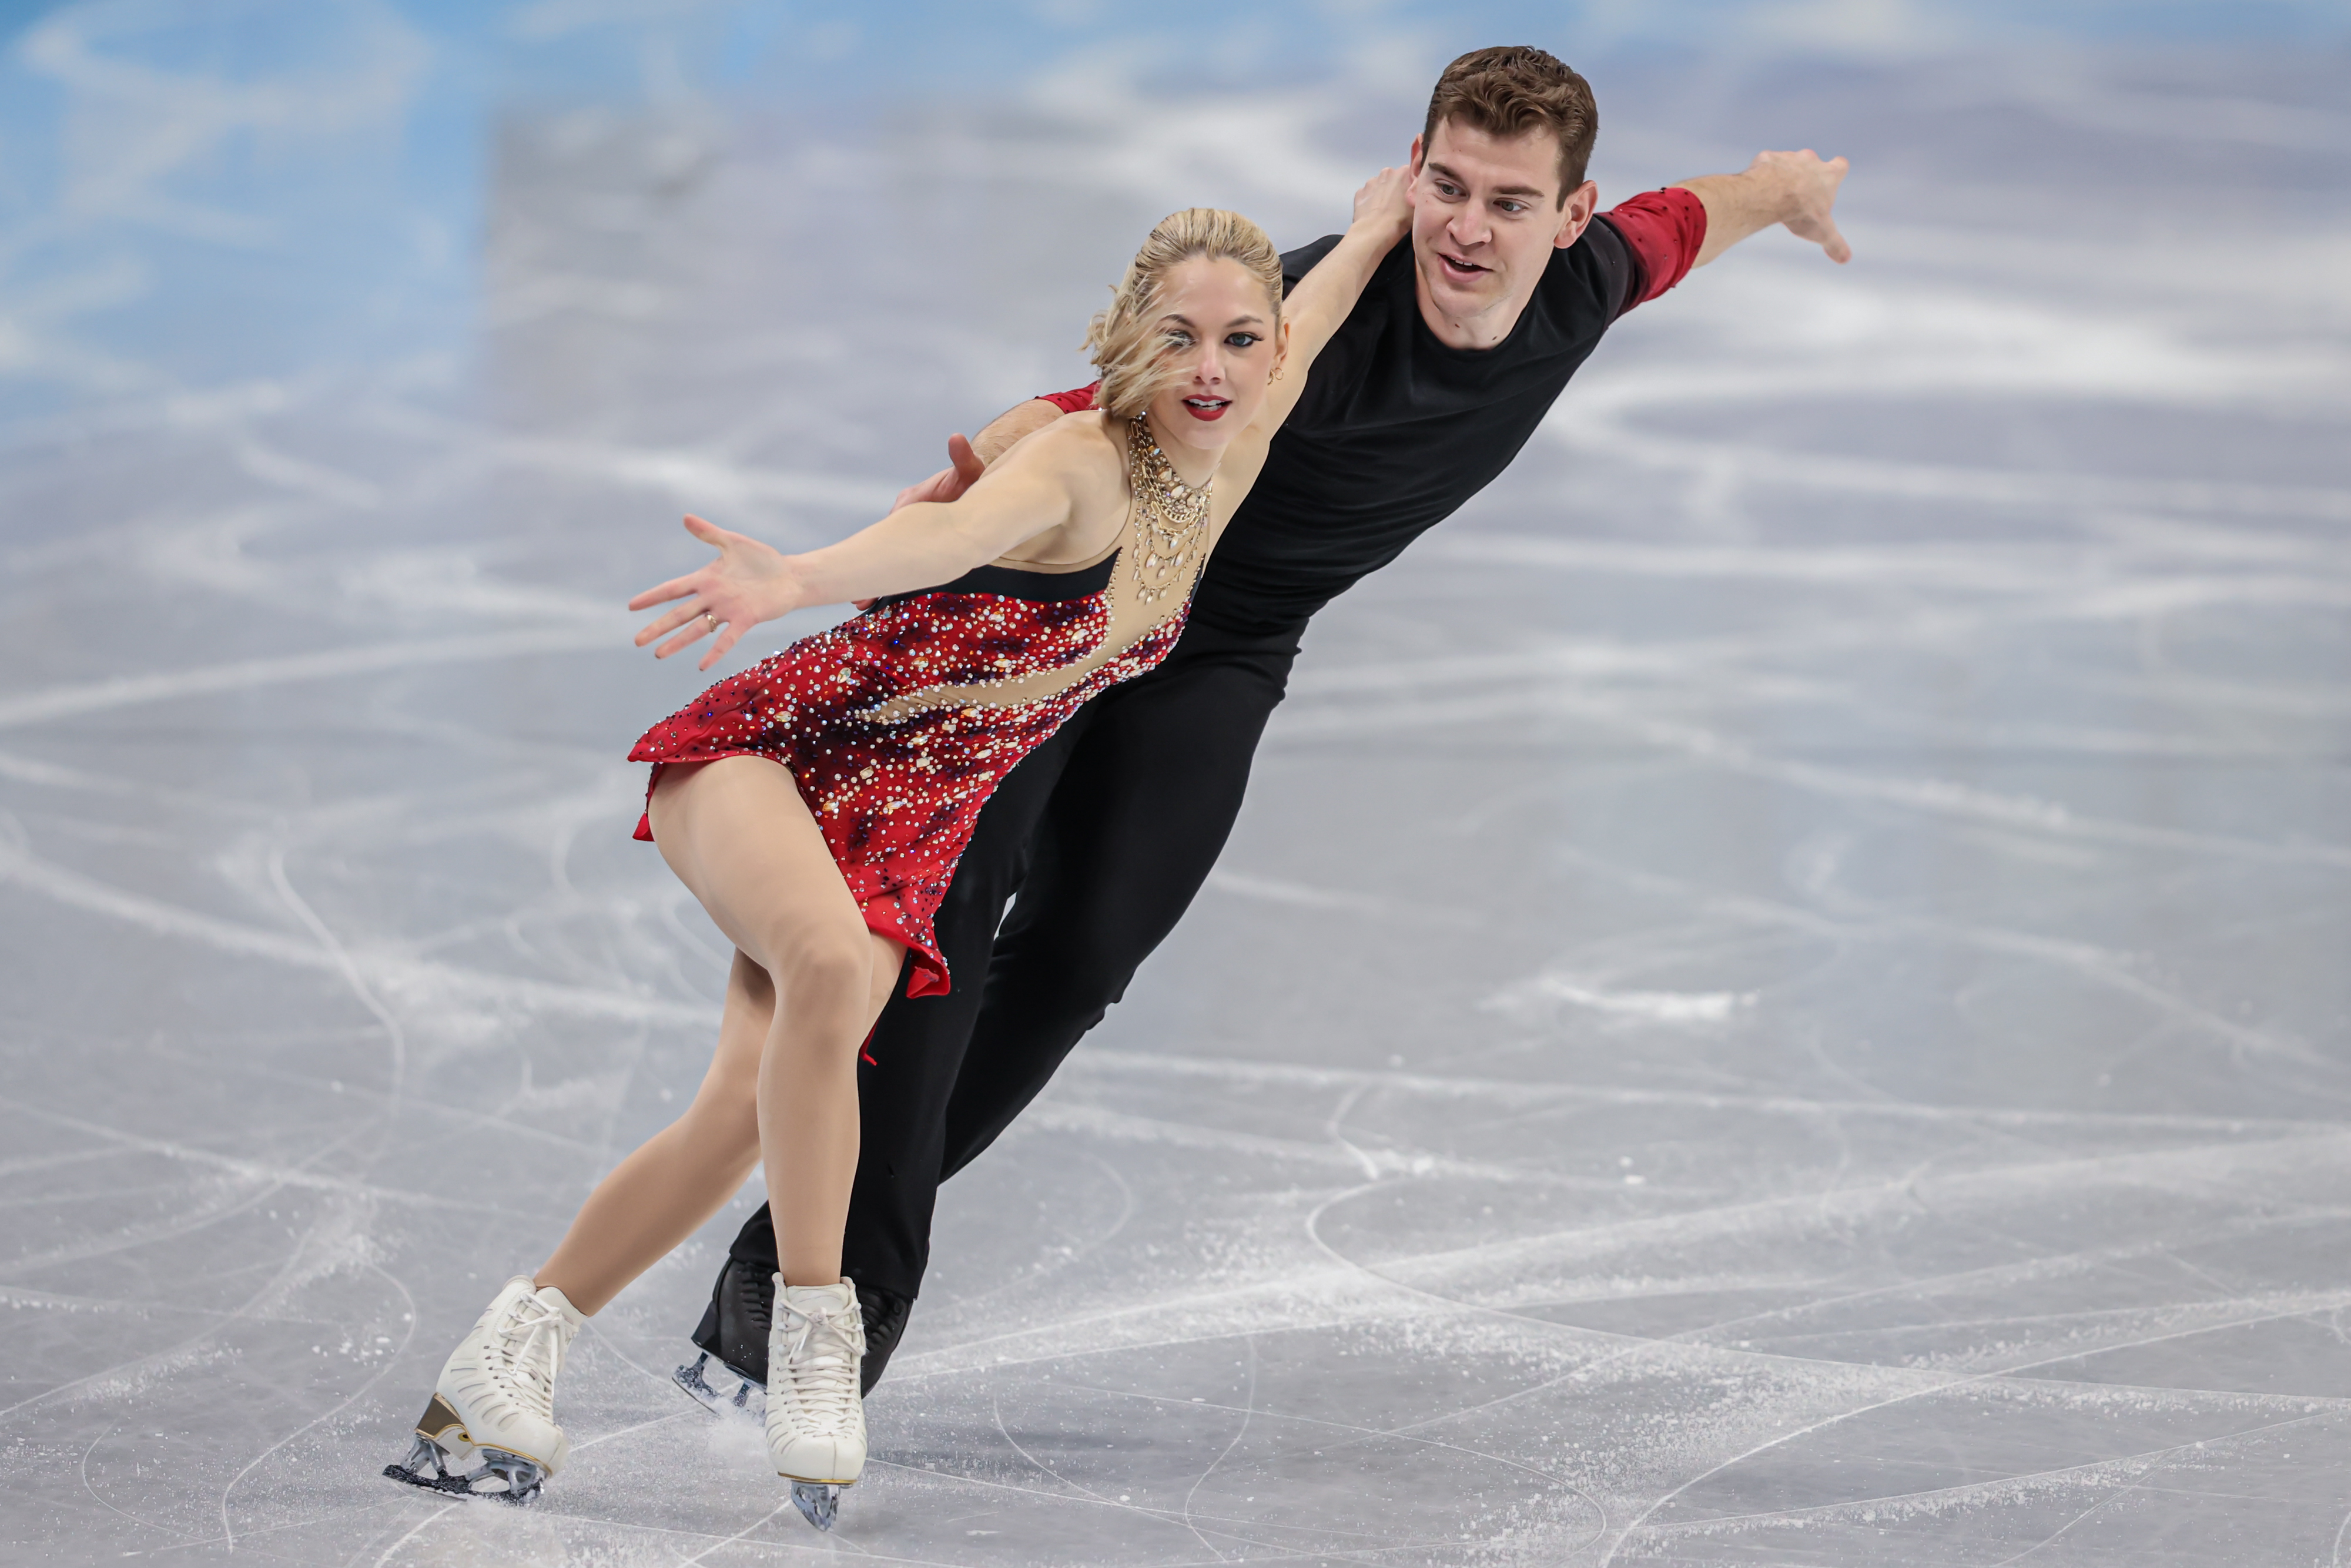 When and How to Watch Figure Skating in the Winter Olympics Sunday